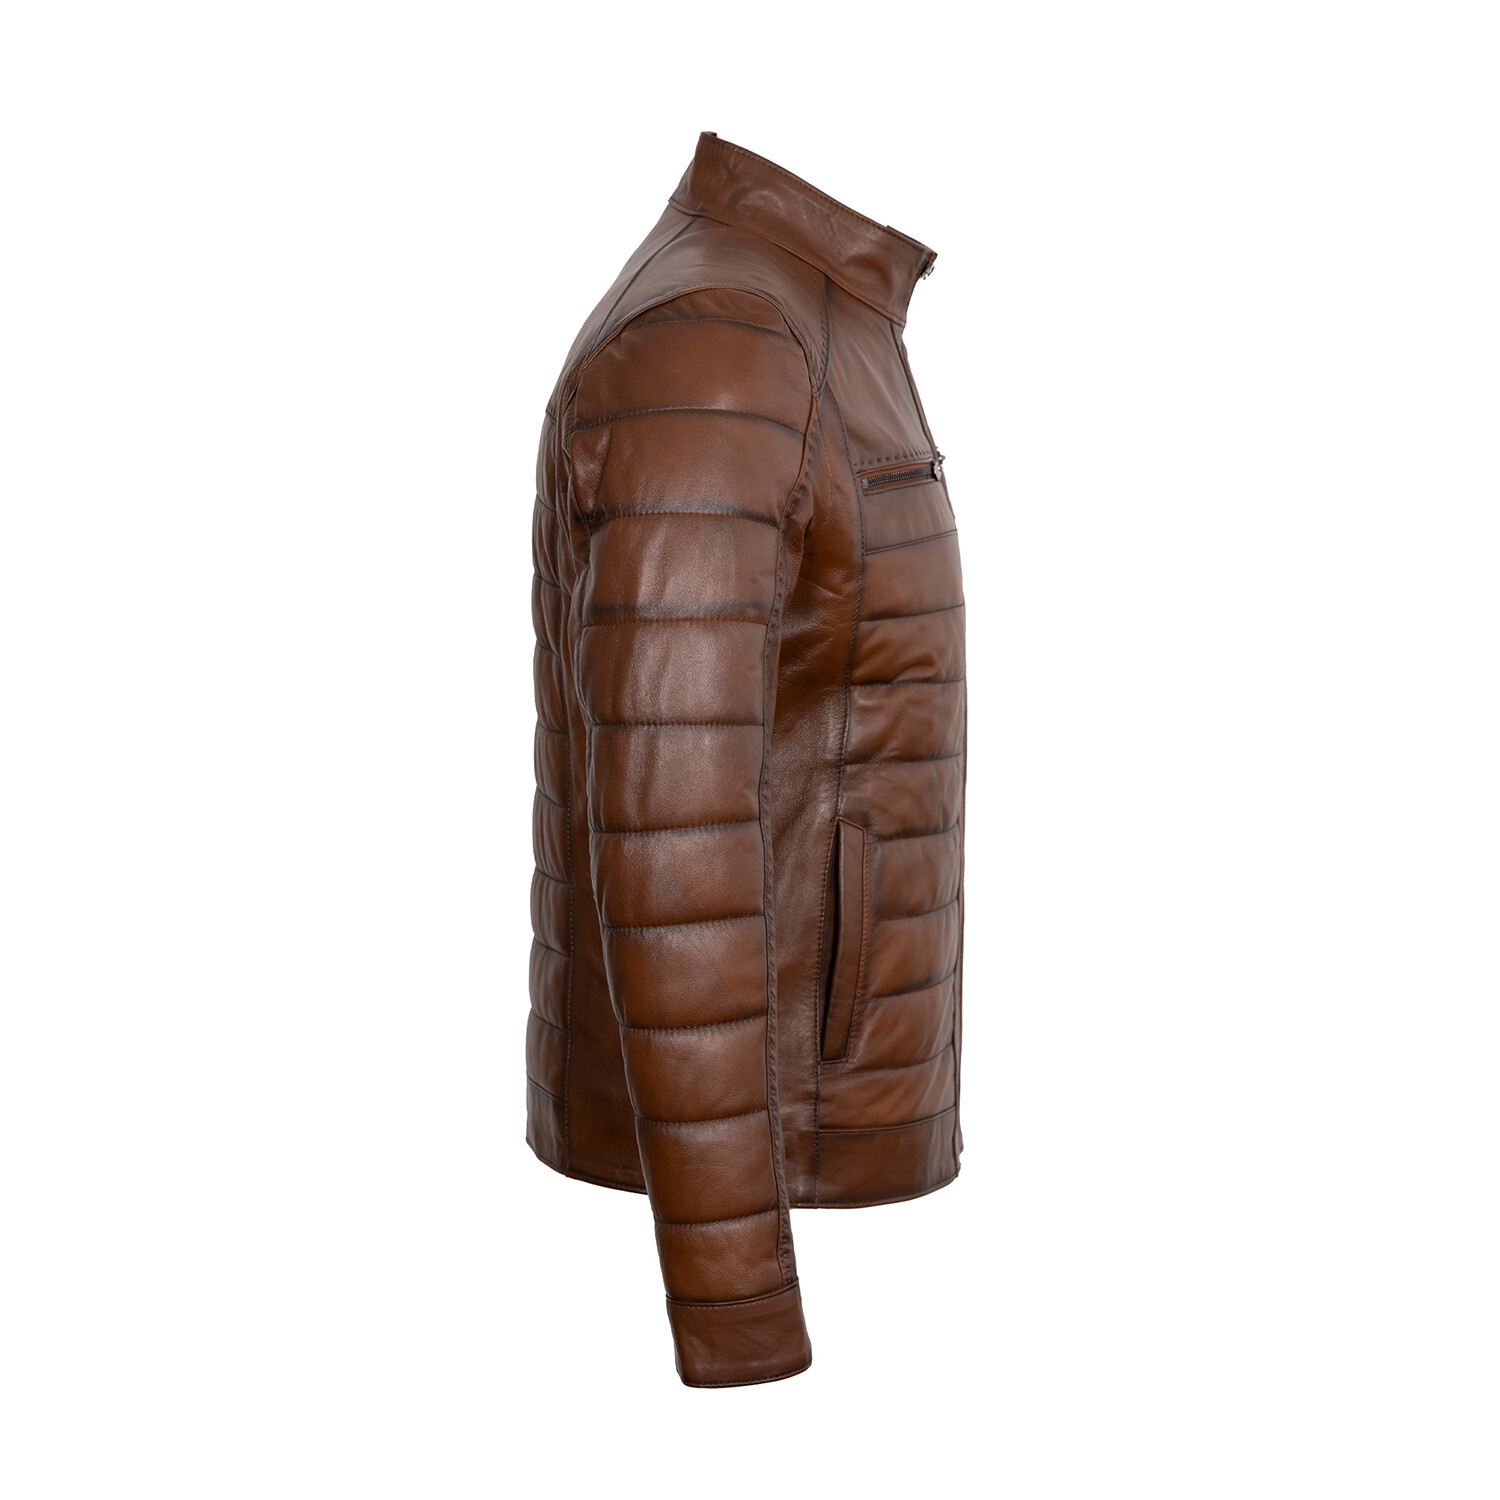 Striped Quilted Jacket // Chestnut (3XL) - Paul Parker - Touch of Modern